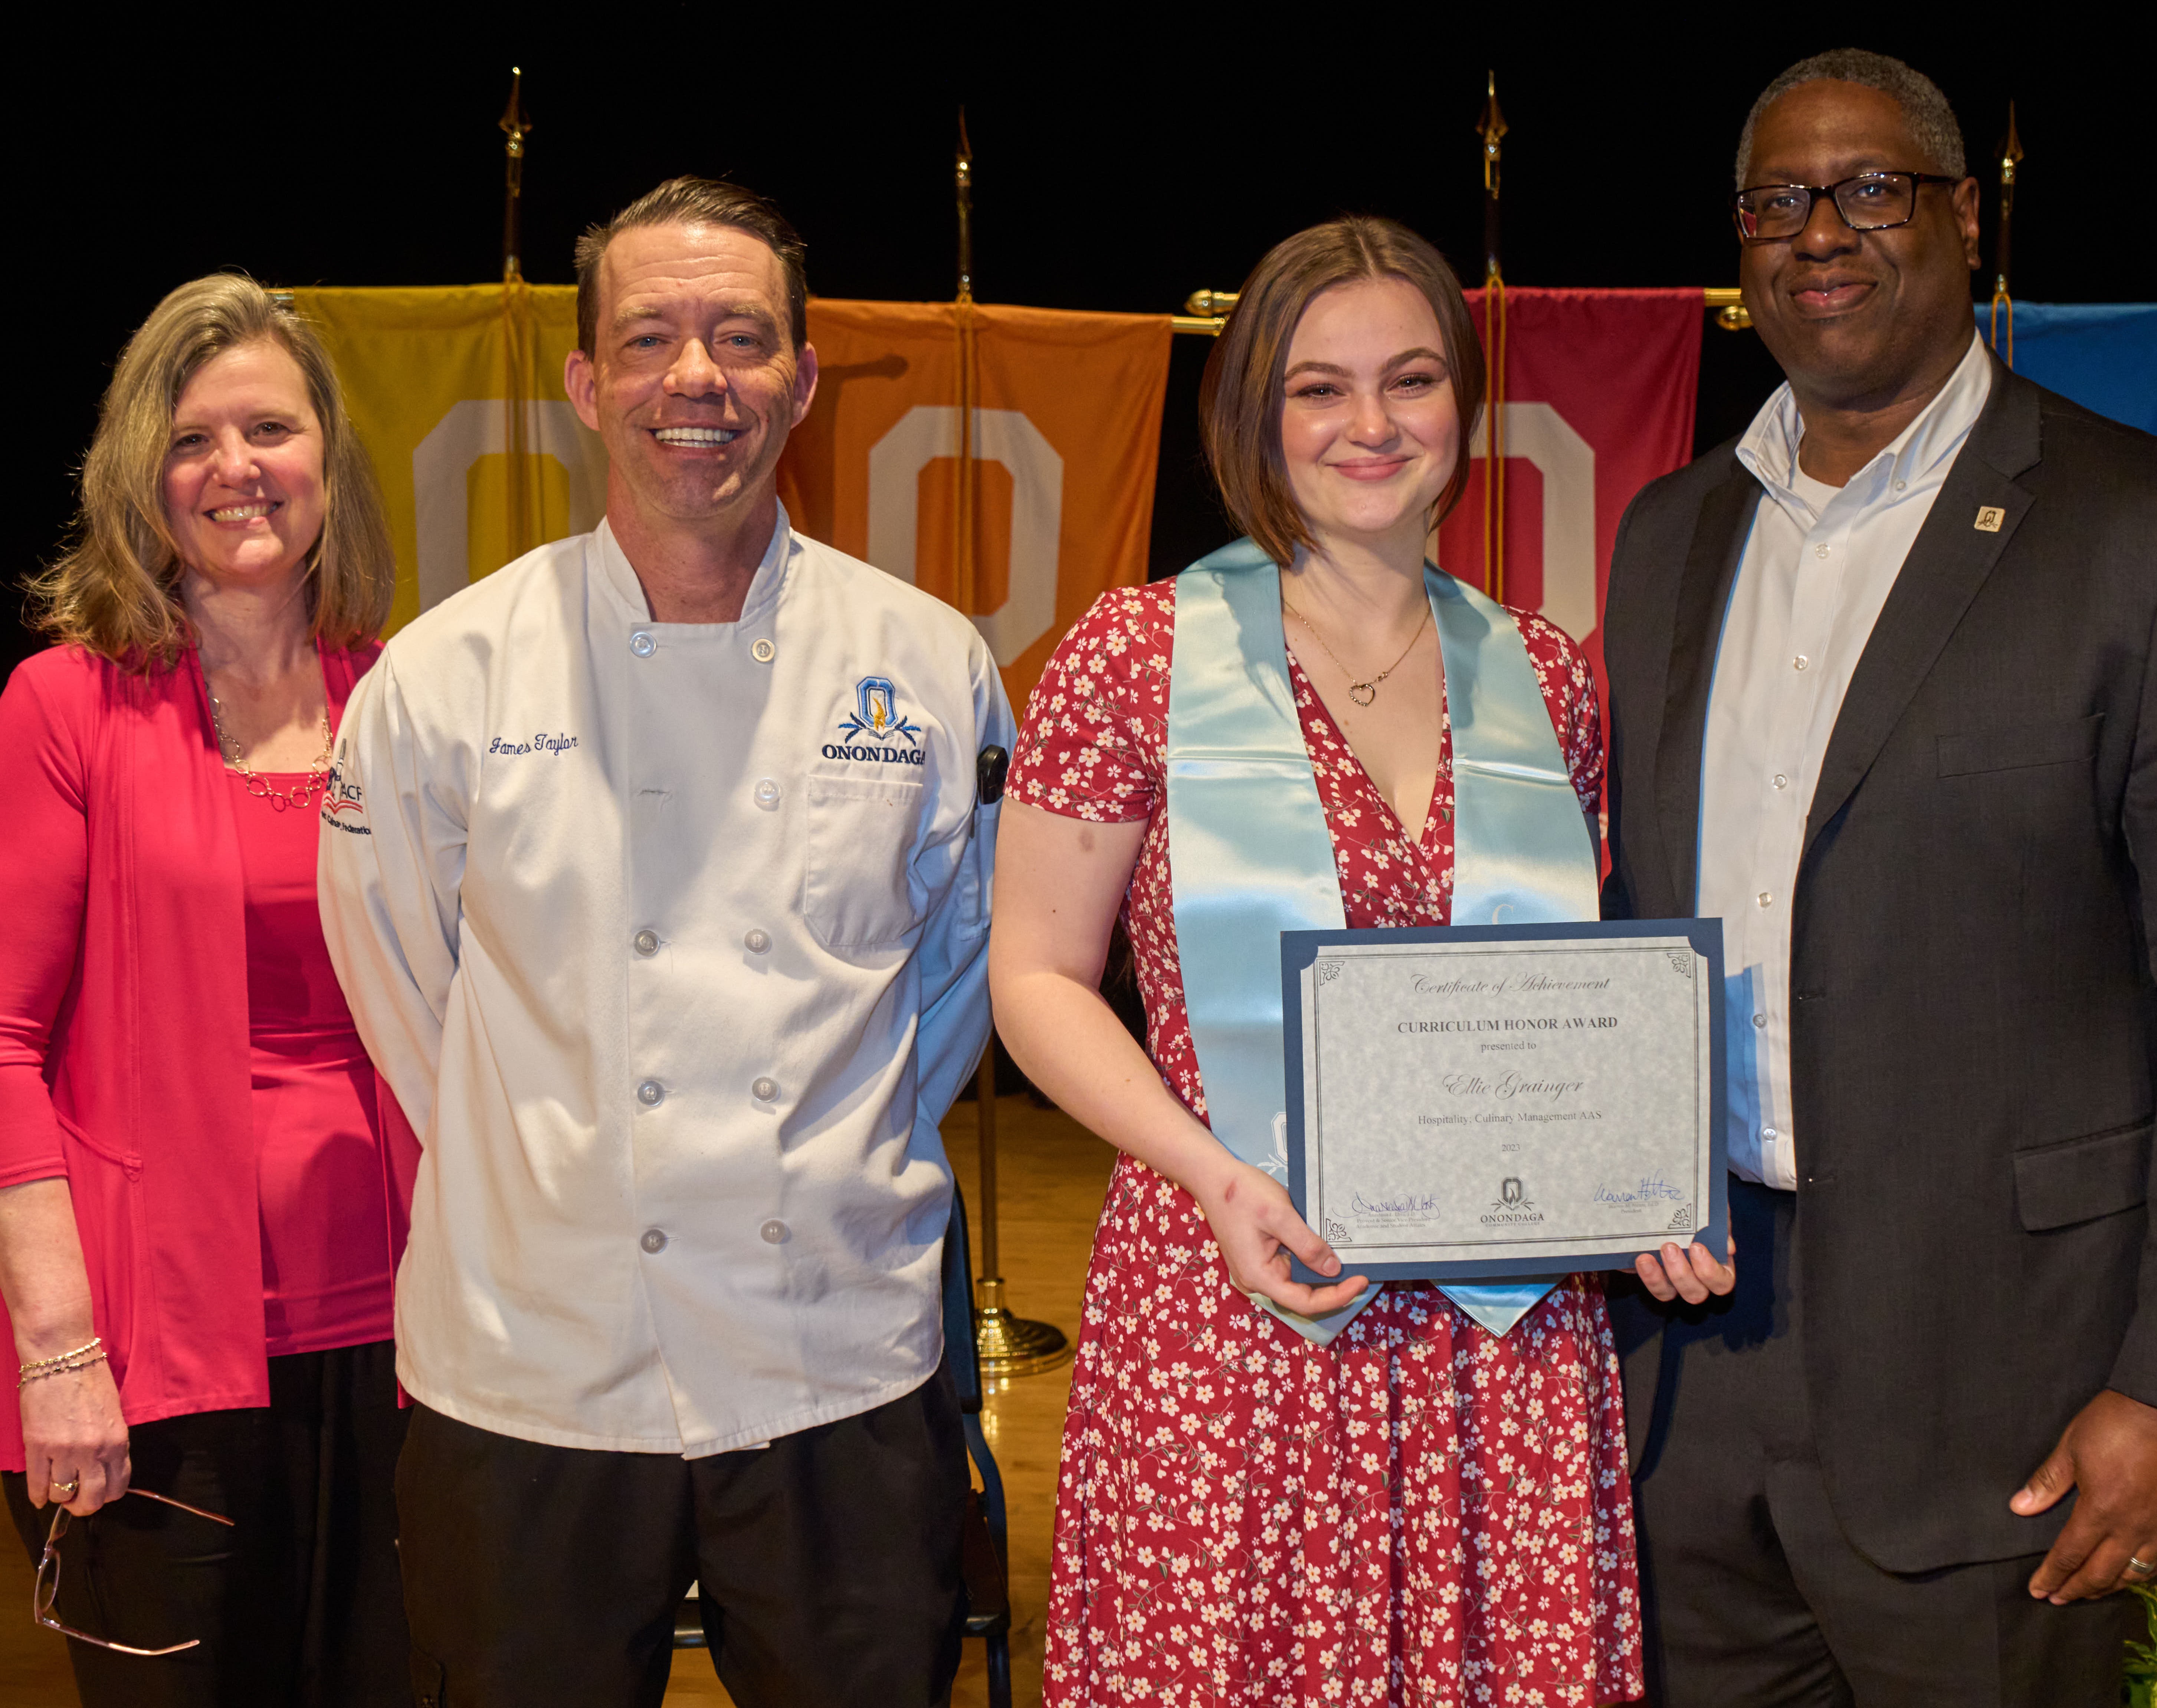 Ellie Grainger, Curriculum Honoree for Hospitality: Culinary Management